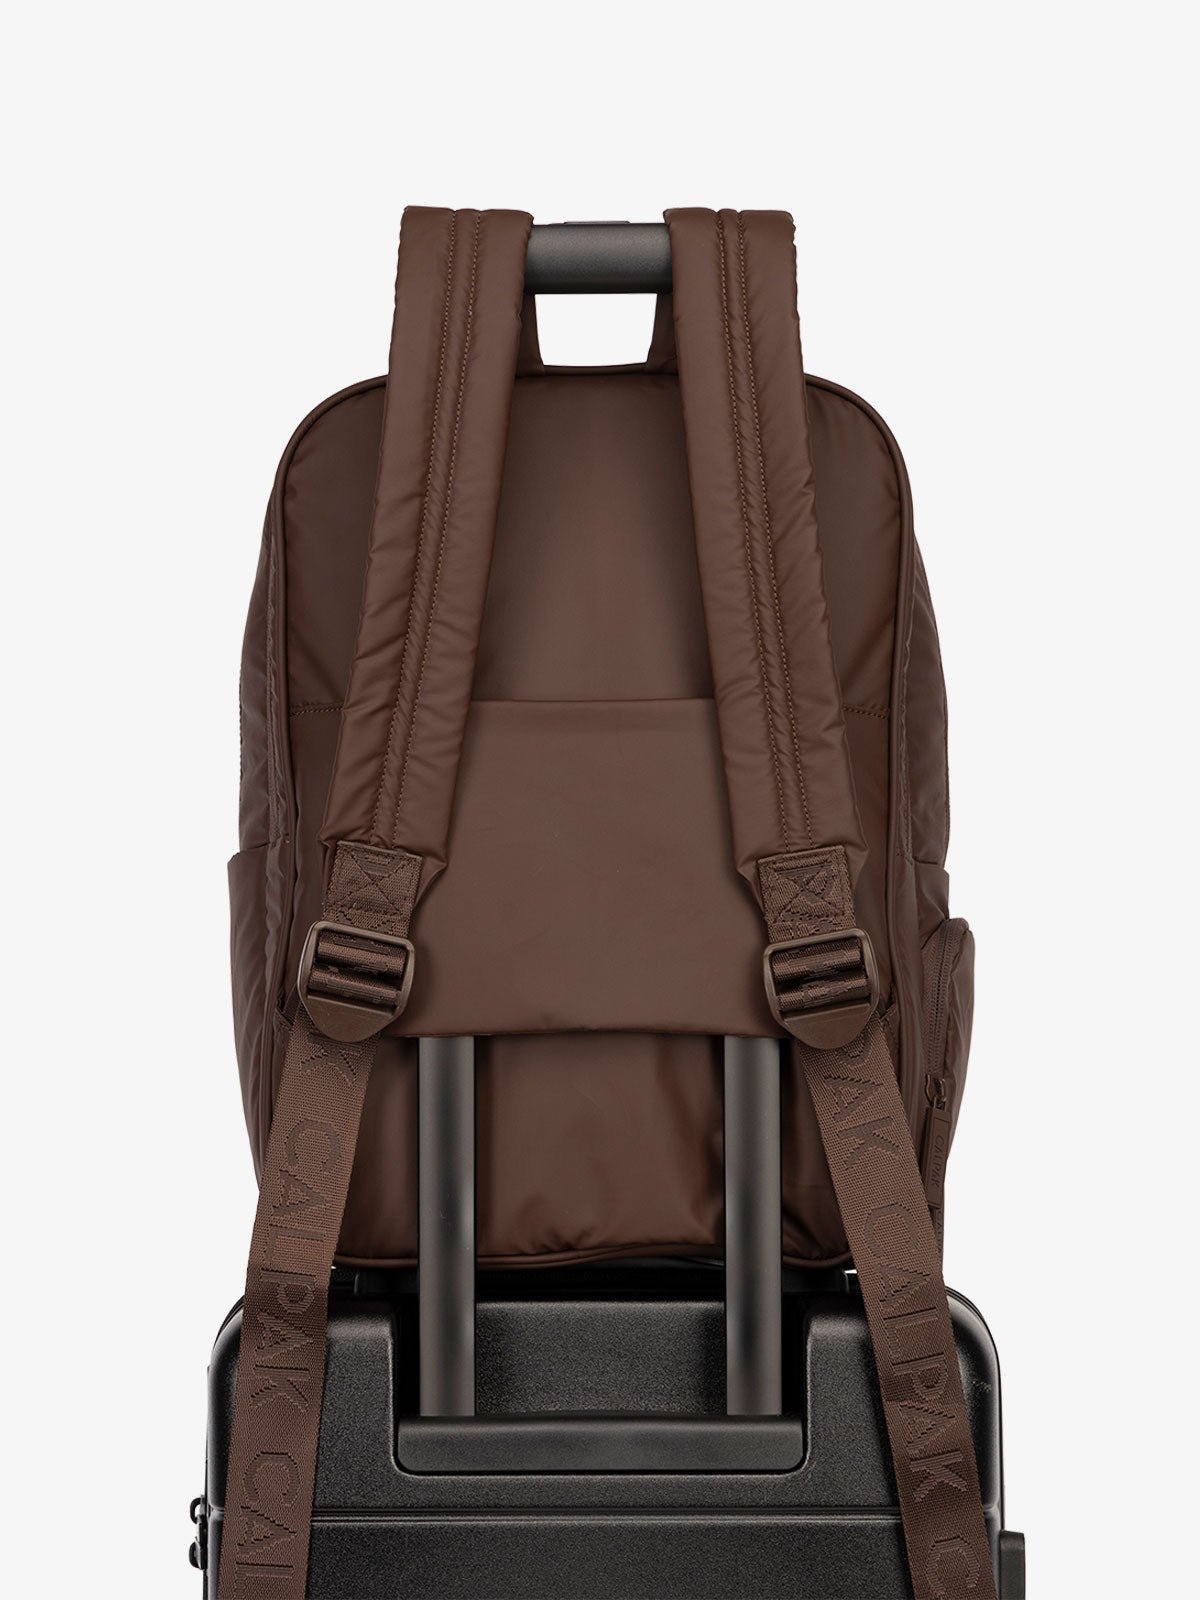 CALPAK water resistant Luka Laptop Backpack with adjustable shoulder straps and trolley sleeve in walnut